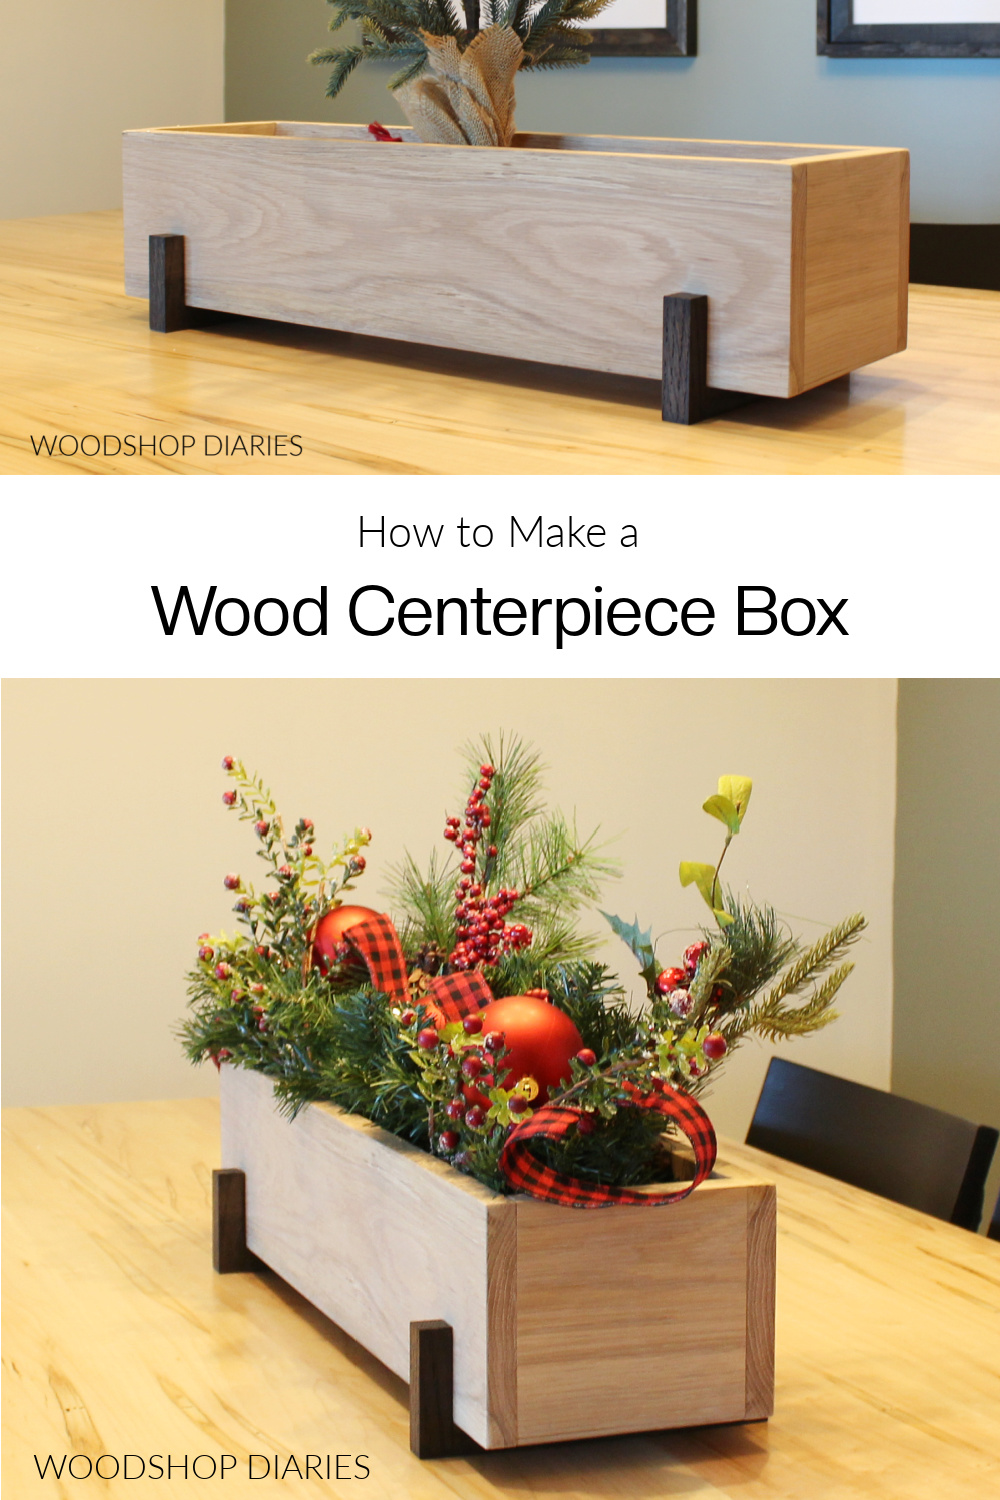 Pinterest collage of wooden centerpiece box showing box at top with mini Christmas tree and box at bottom full of garland with text "how to make a wood centerpiece box"